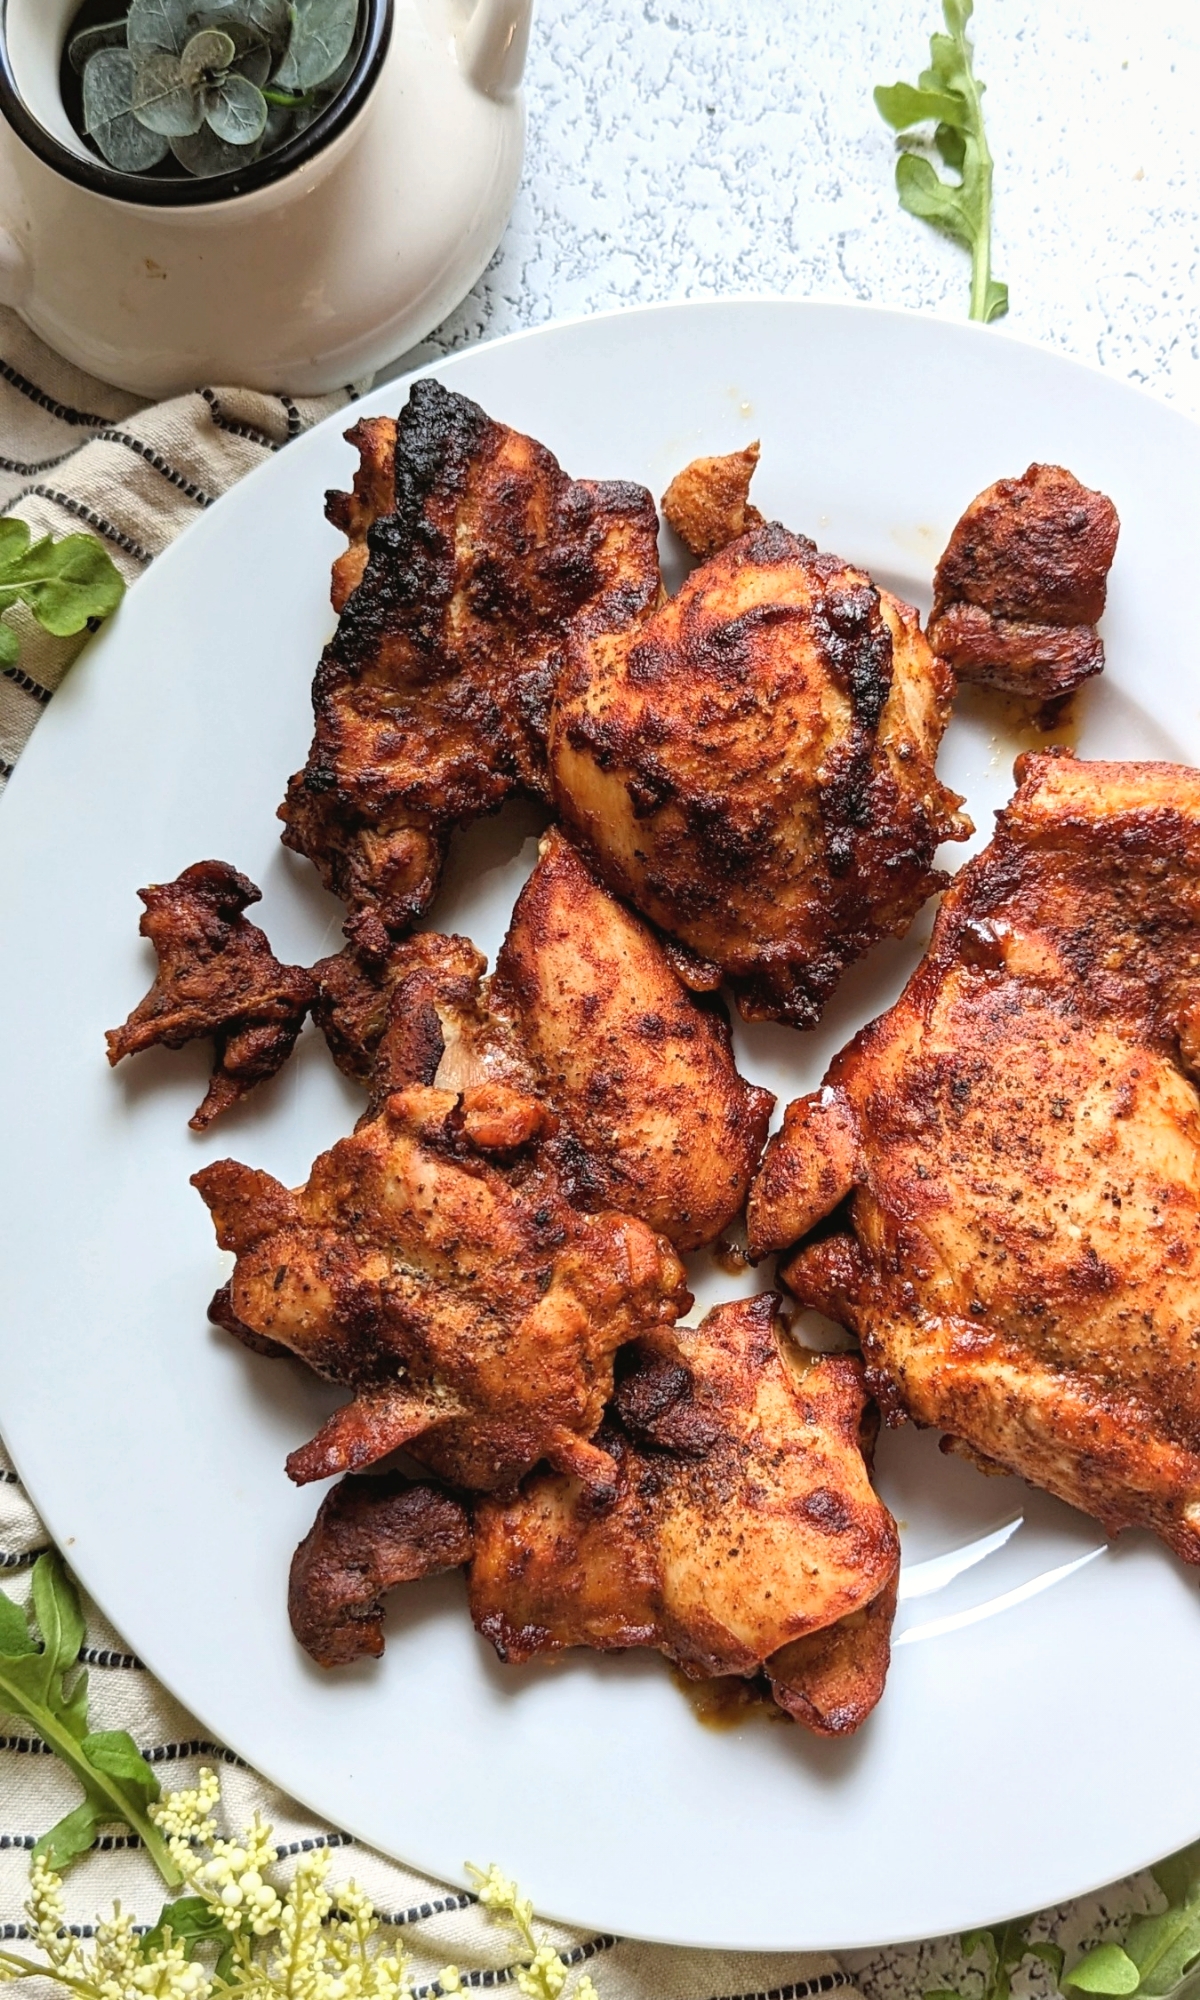 low sodium chicken with bbq sauce easy low salt bbq recipes low salt chicken dinner ideas for grilling or baking